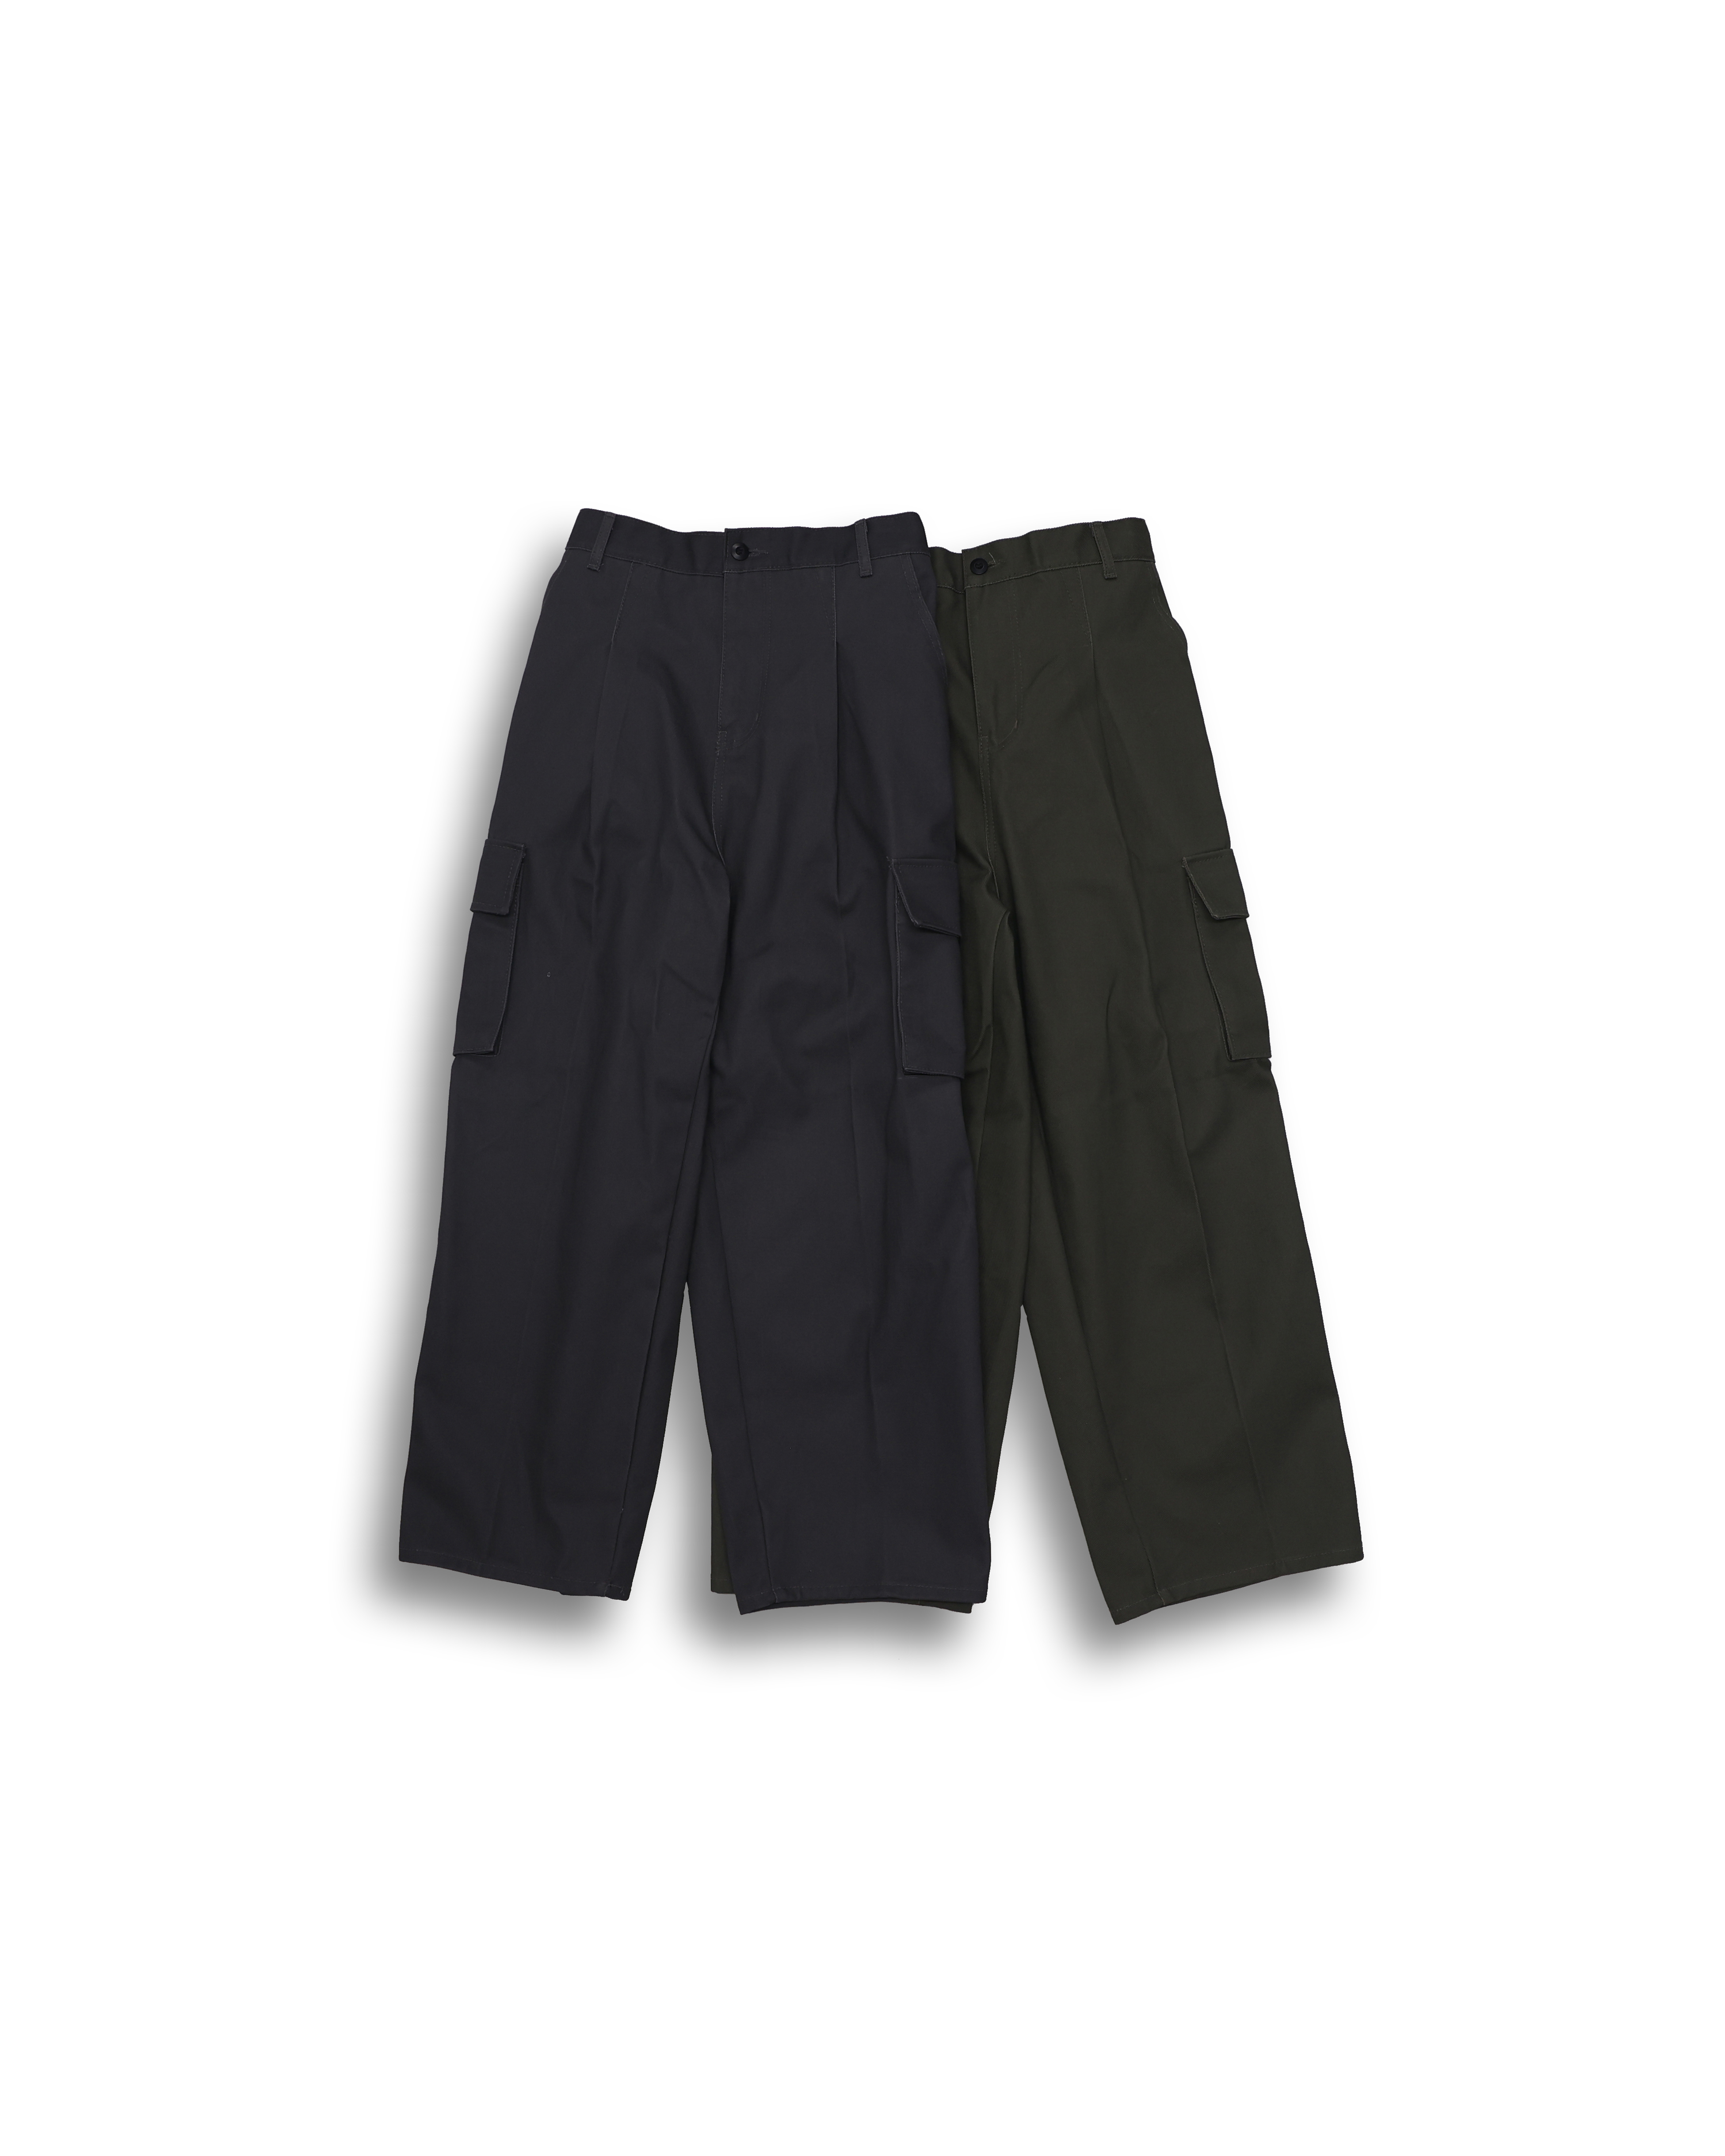 WOT Heavy Cotton Work Cargo Pants (Charcoal/Olive)